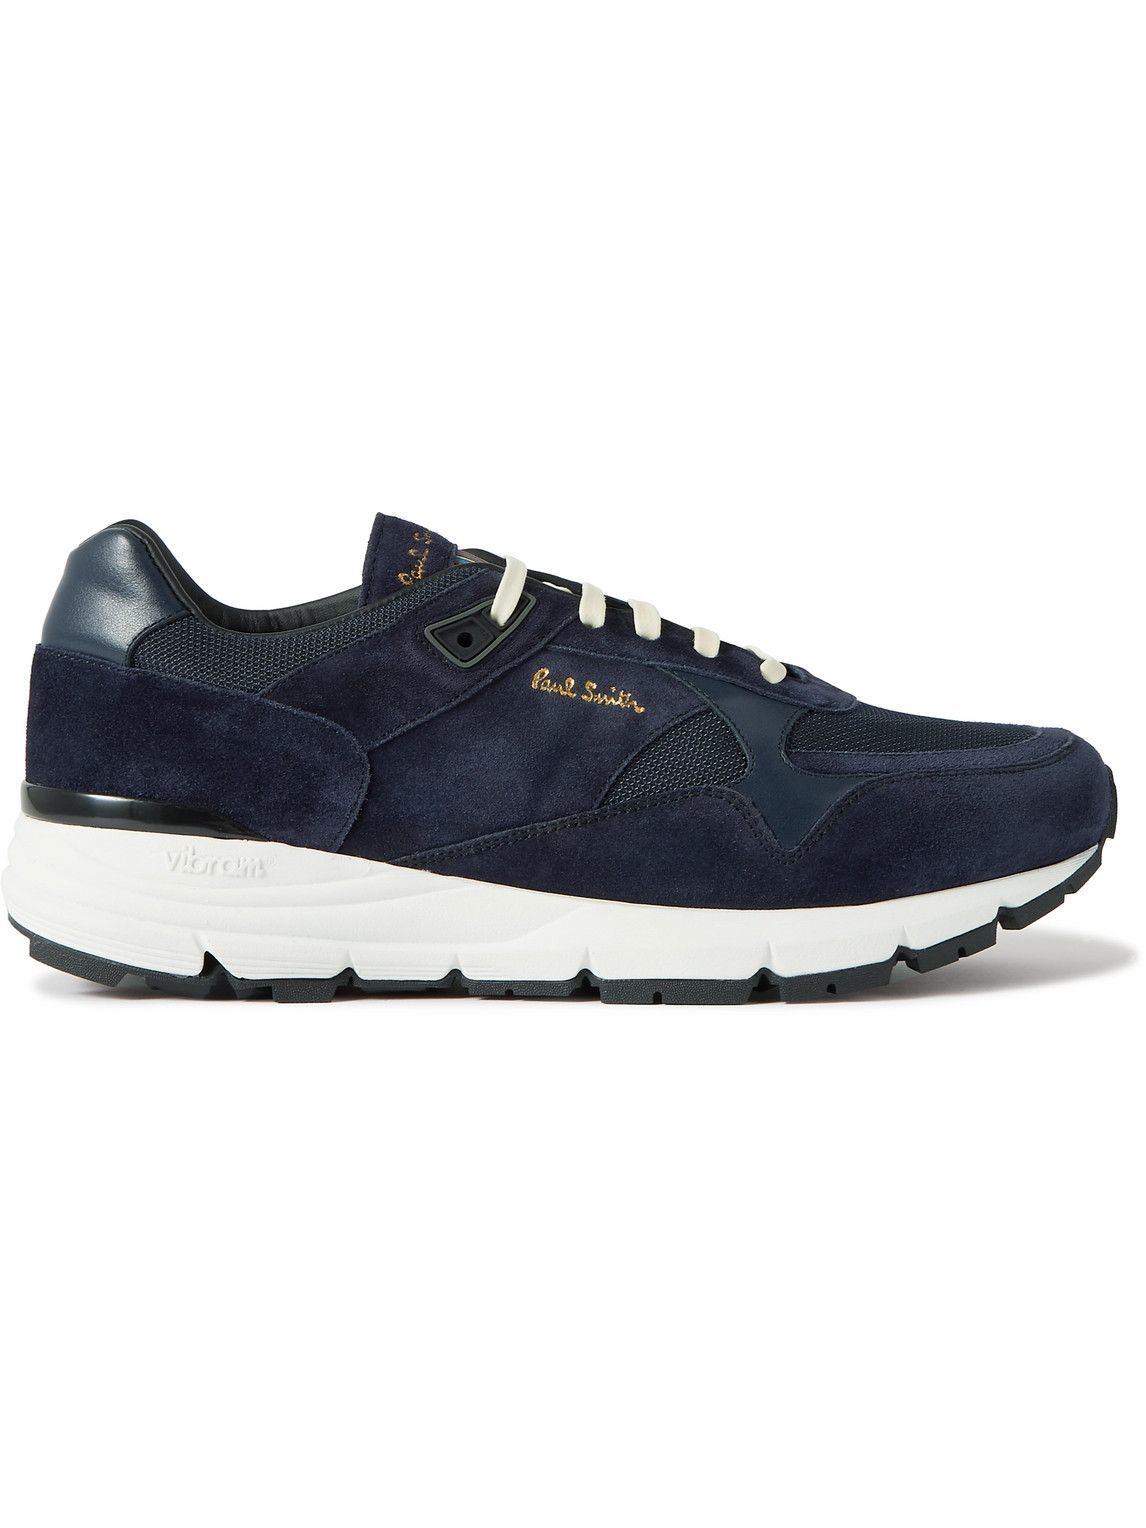 Paul Smith - Gorio Leather-Trimmed Mesh and Suede Sneakers - Blue Paul ...